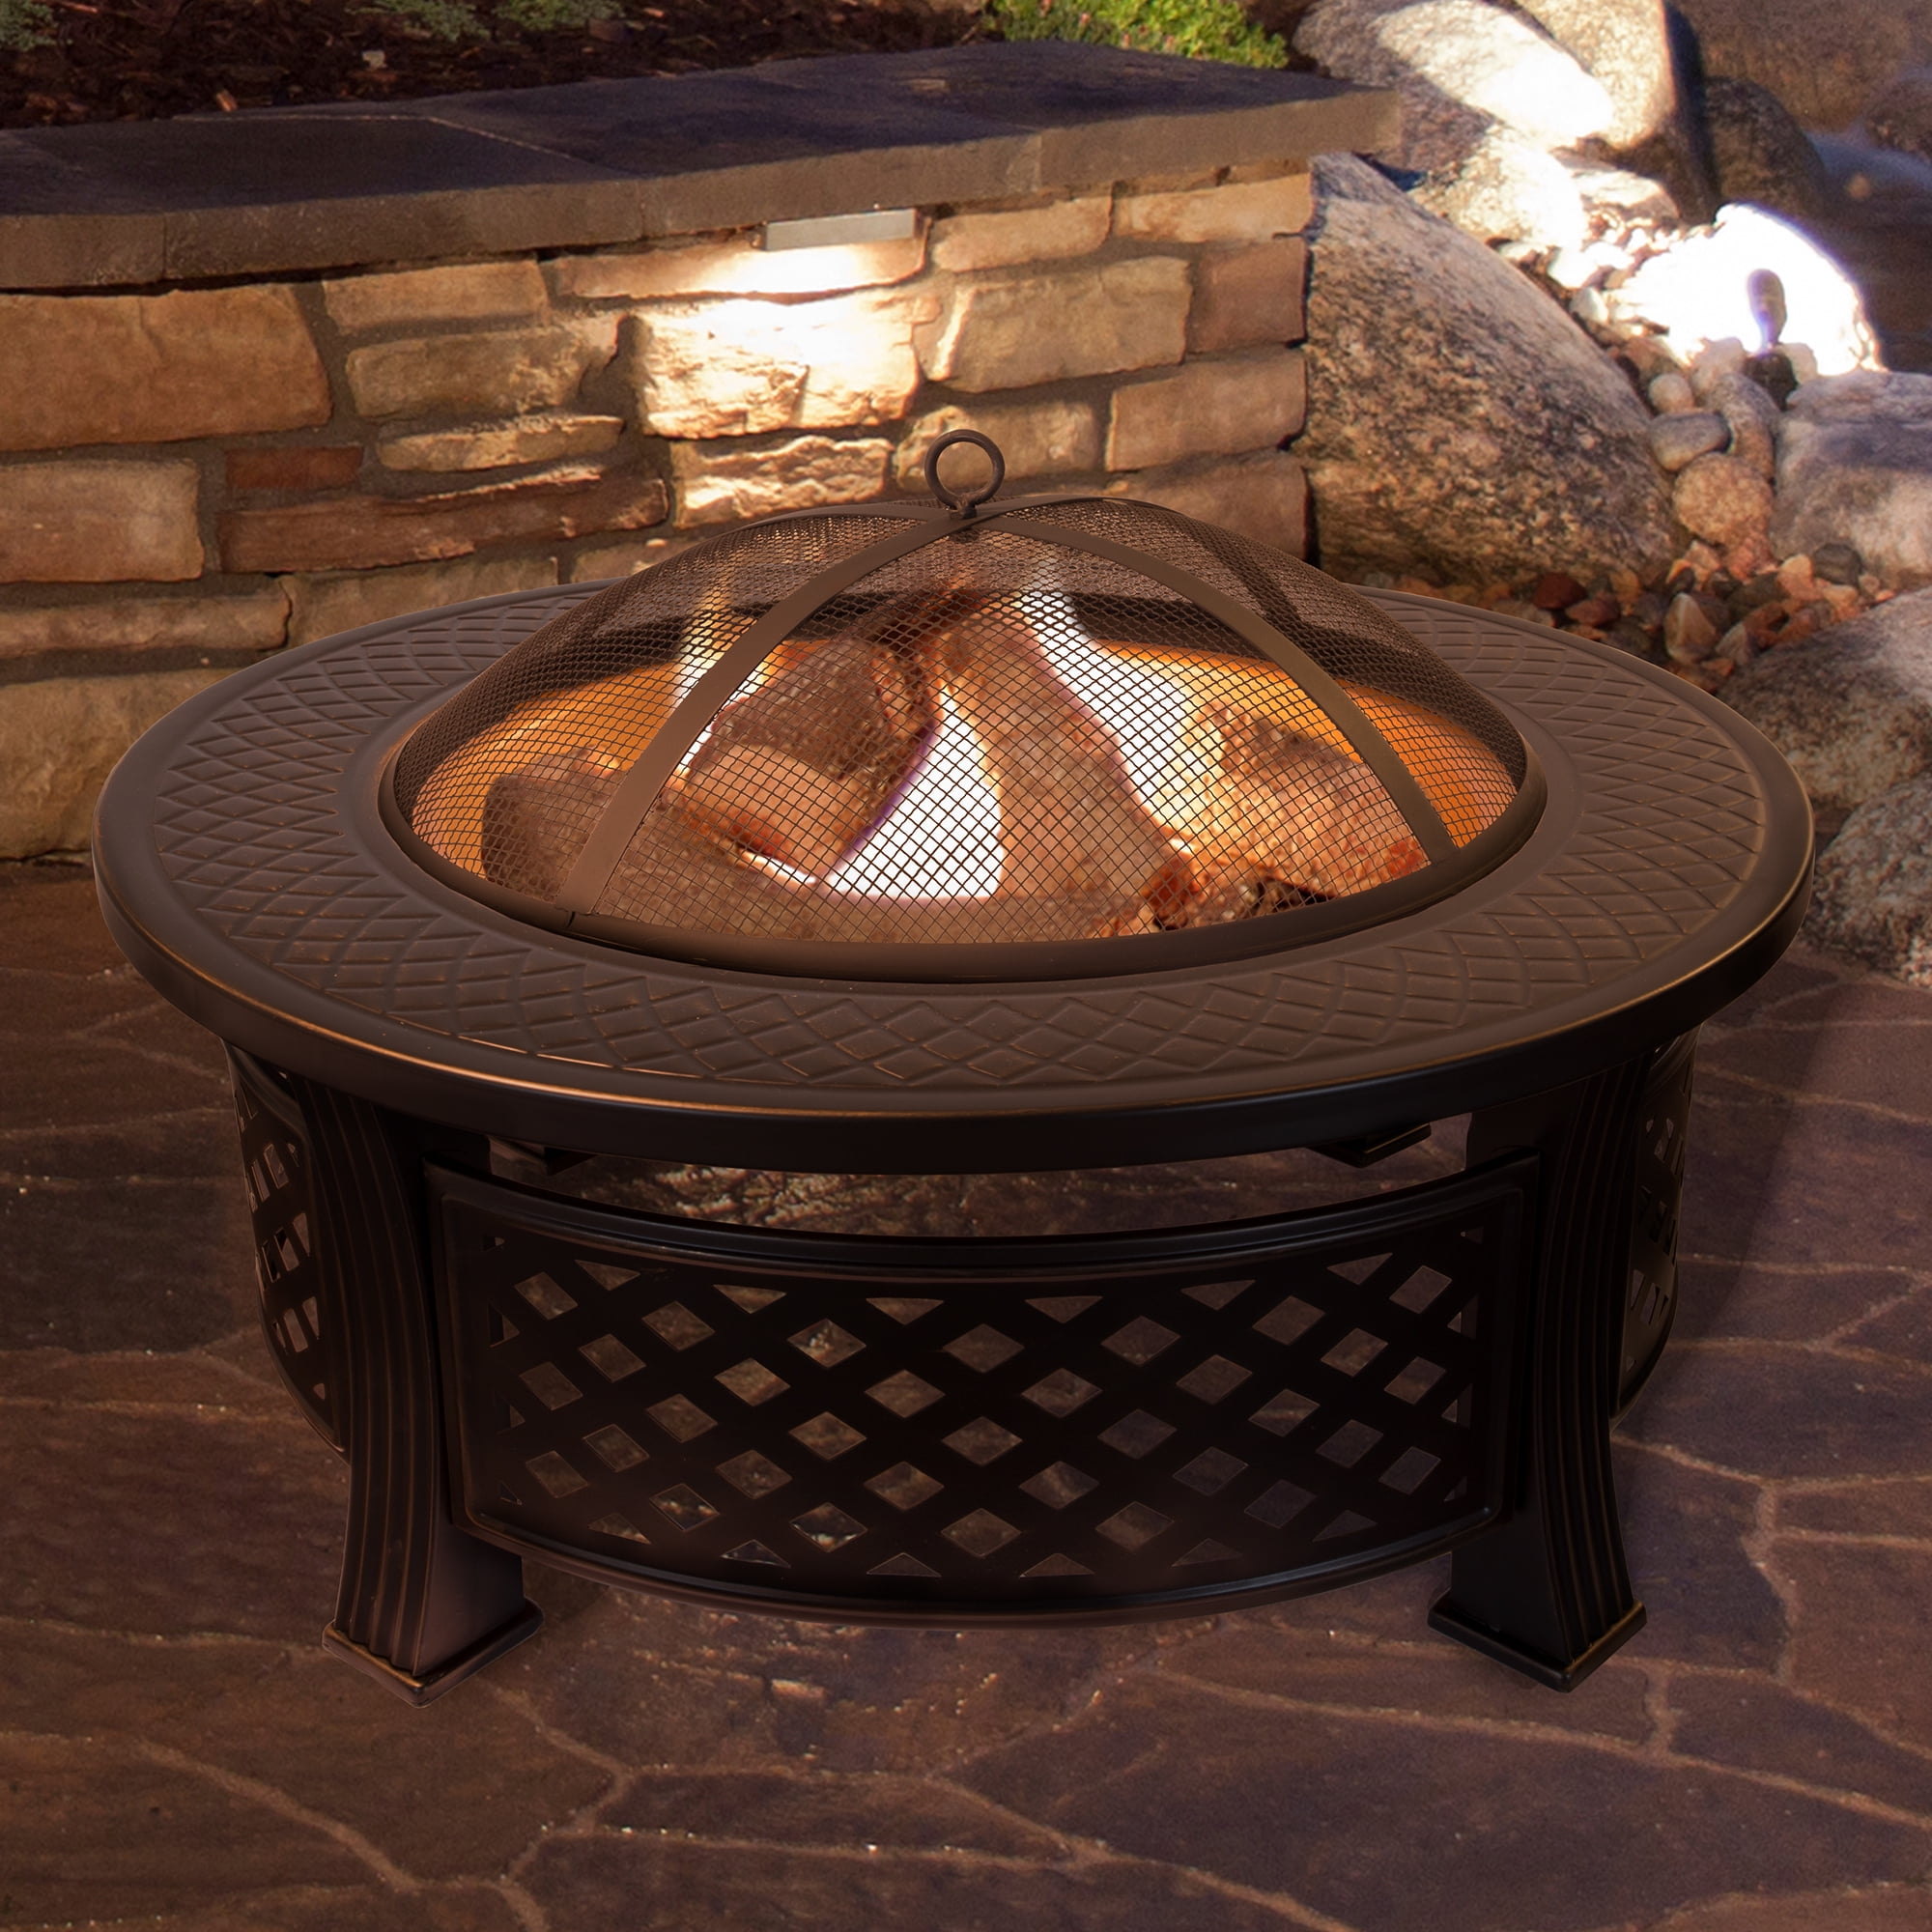 Spark Cover and Poker Solid Cast Iron Garden Firebowl Fireplace Ø 75 cm with Grill